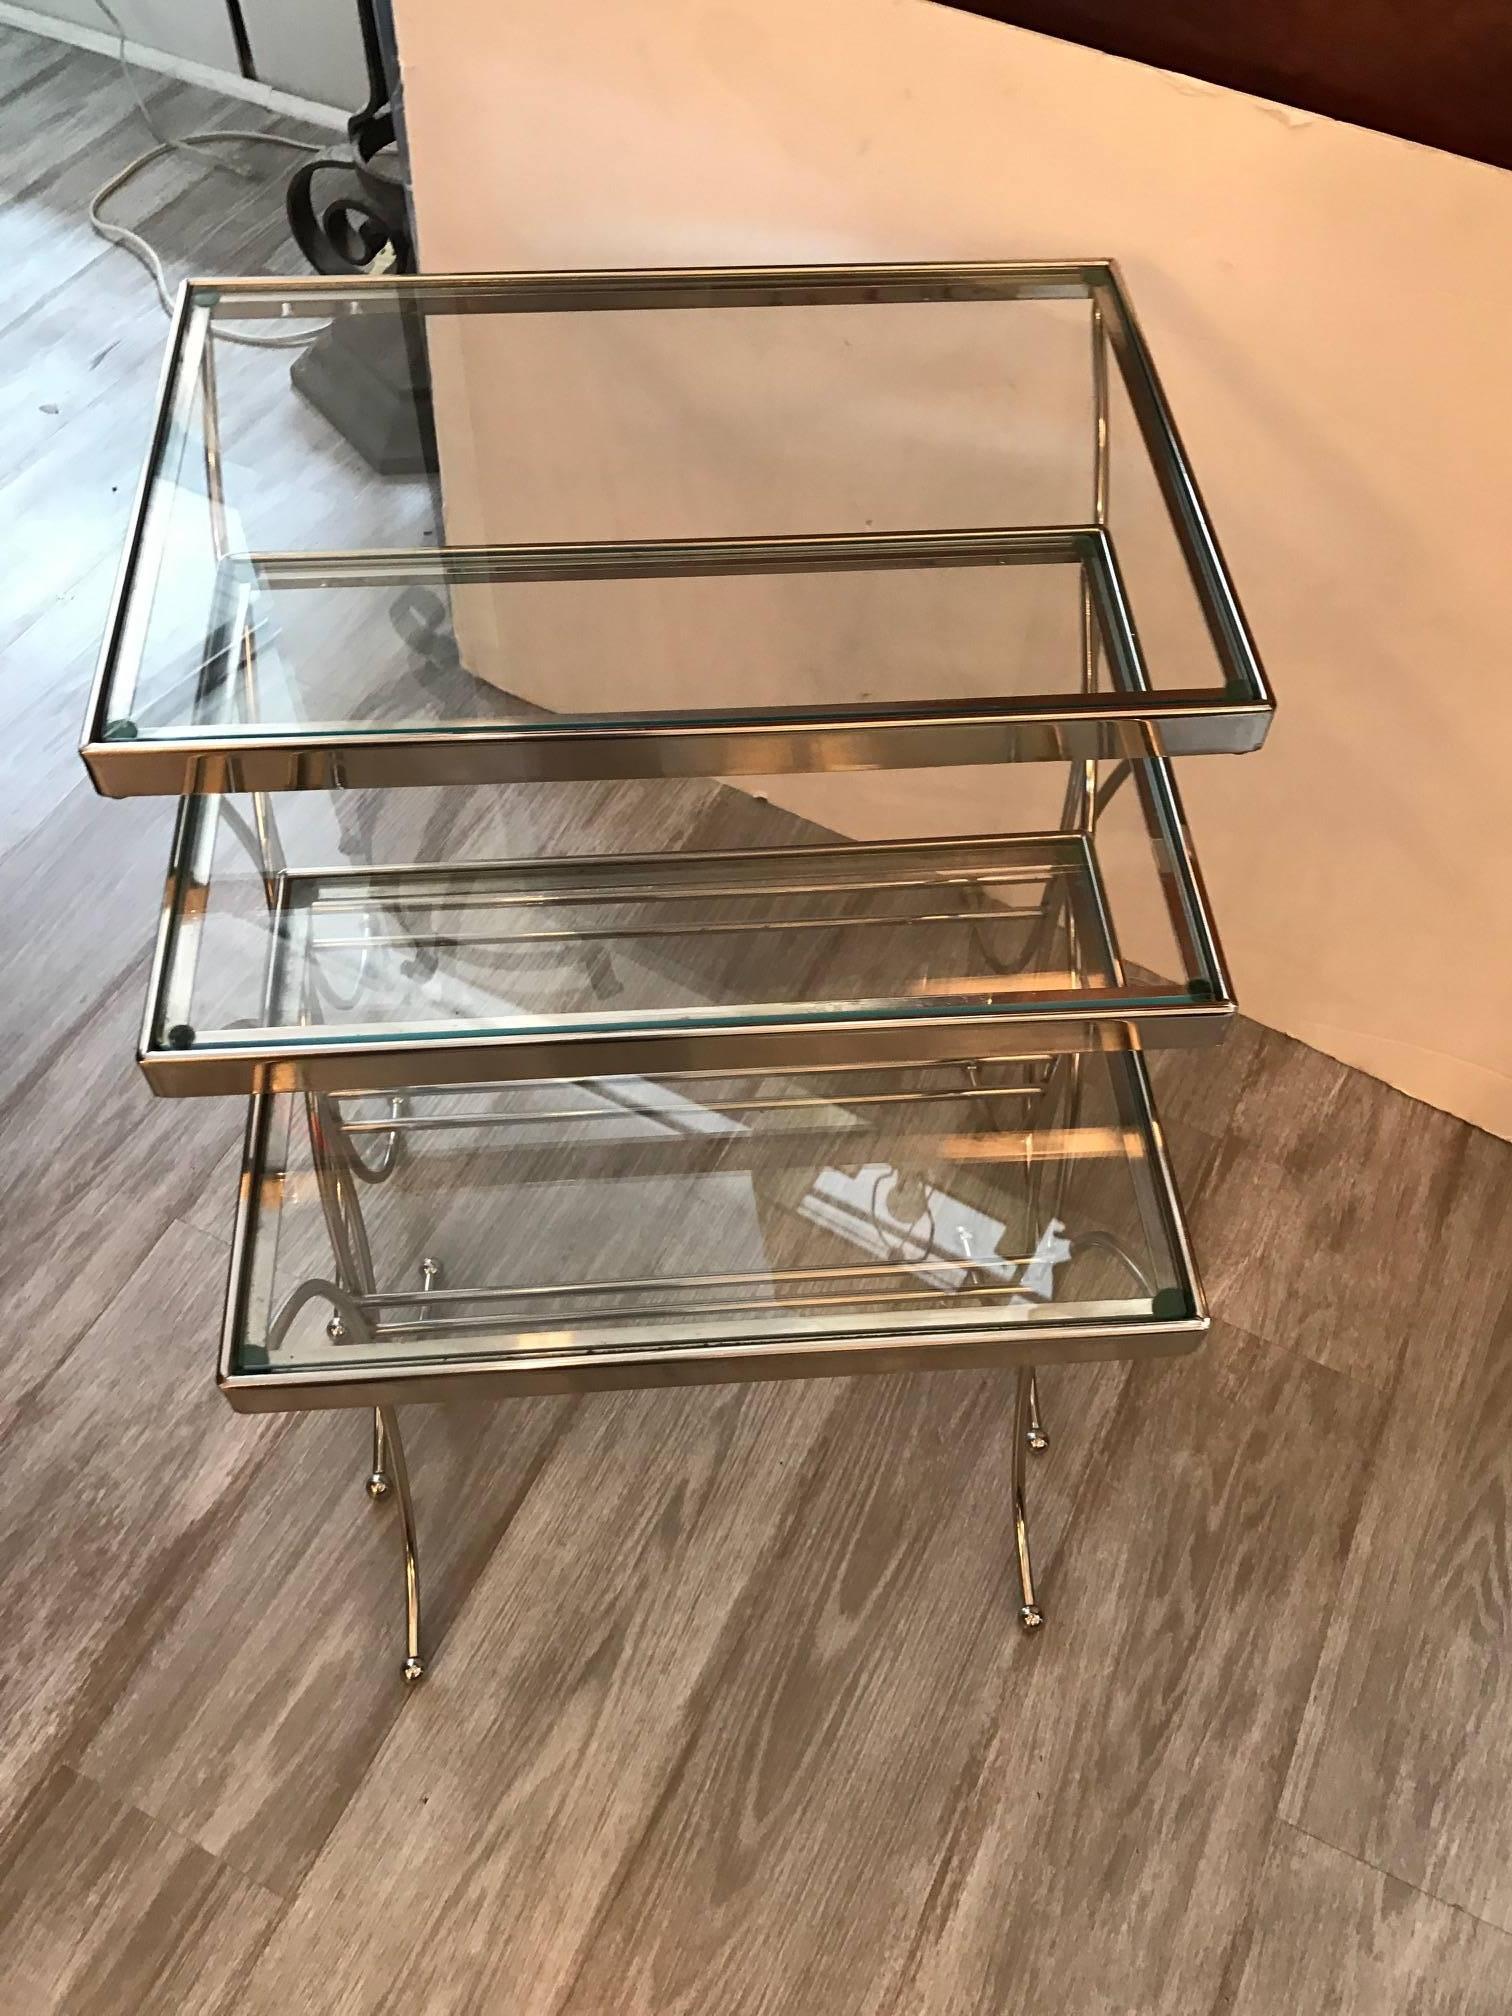 Mid-Century Modern chrome and glass nesting tables. The tables of graduated sizes fit neatly into each other making this great for a small space.